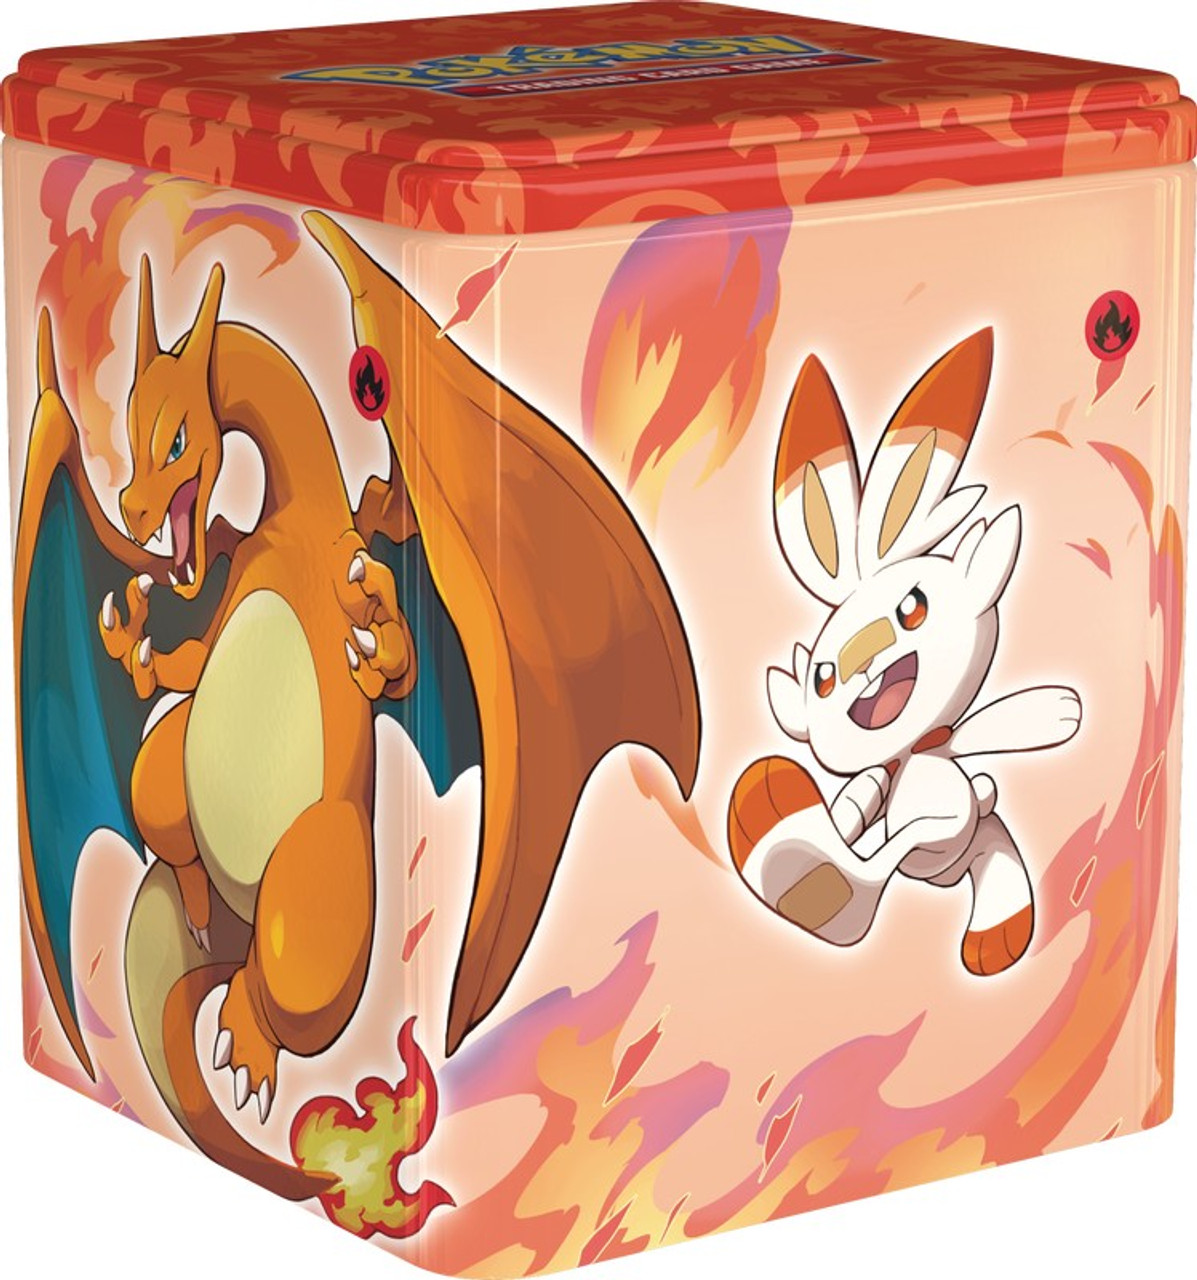 Pokemon Fighting, Fire, and Darkness Stacking Tins - Complete Art Set (3 Tins)